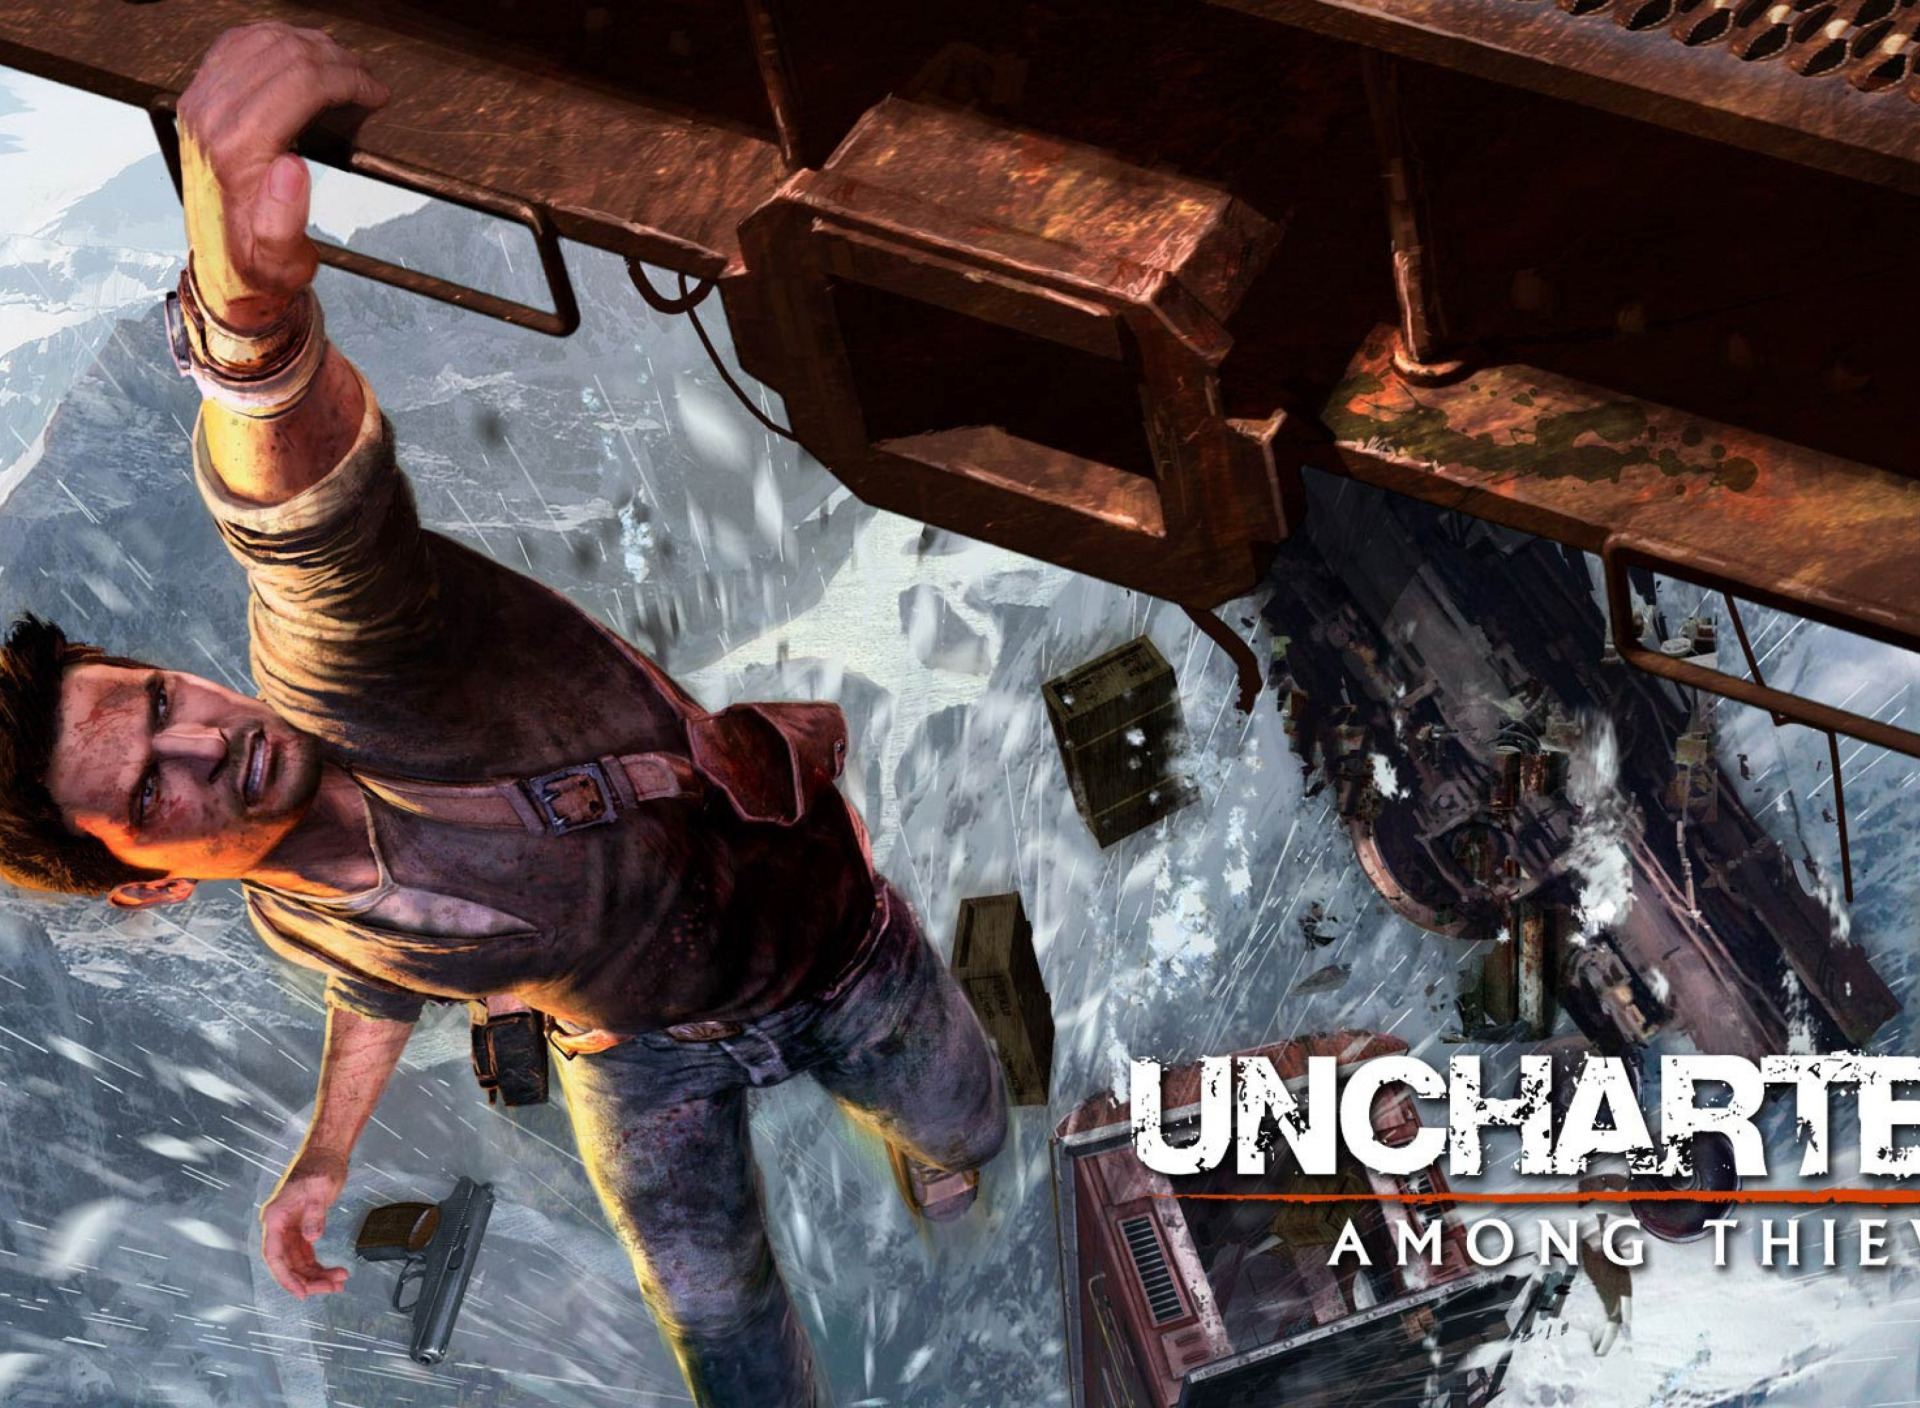 Uncharted 2 among thieves steam фото 67